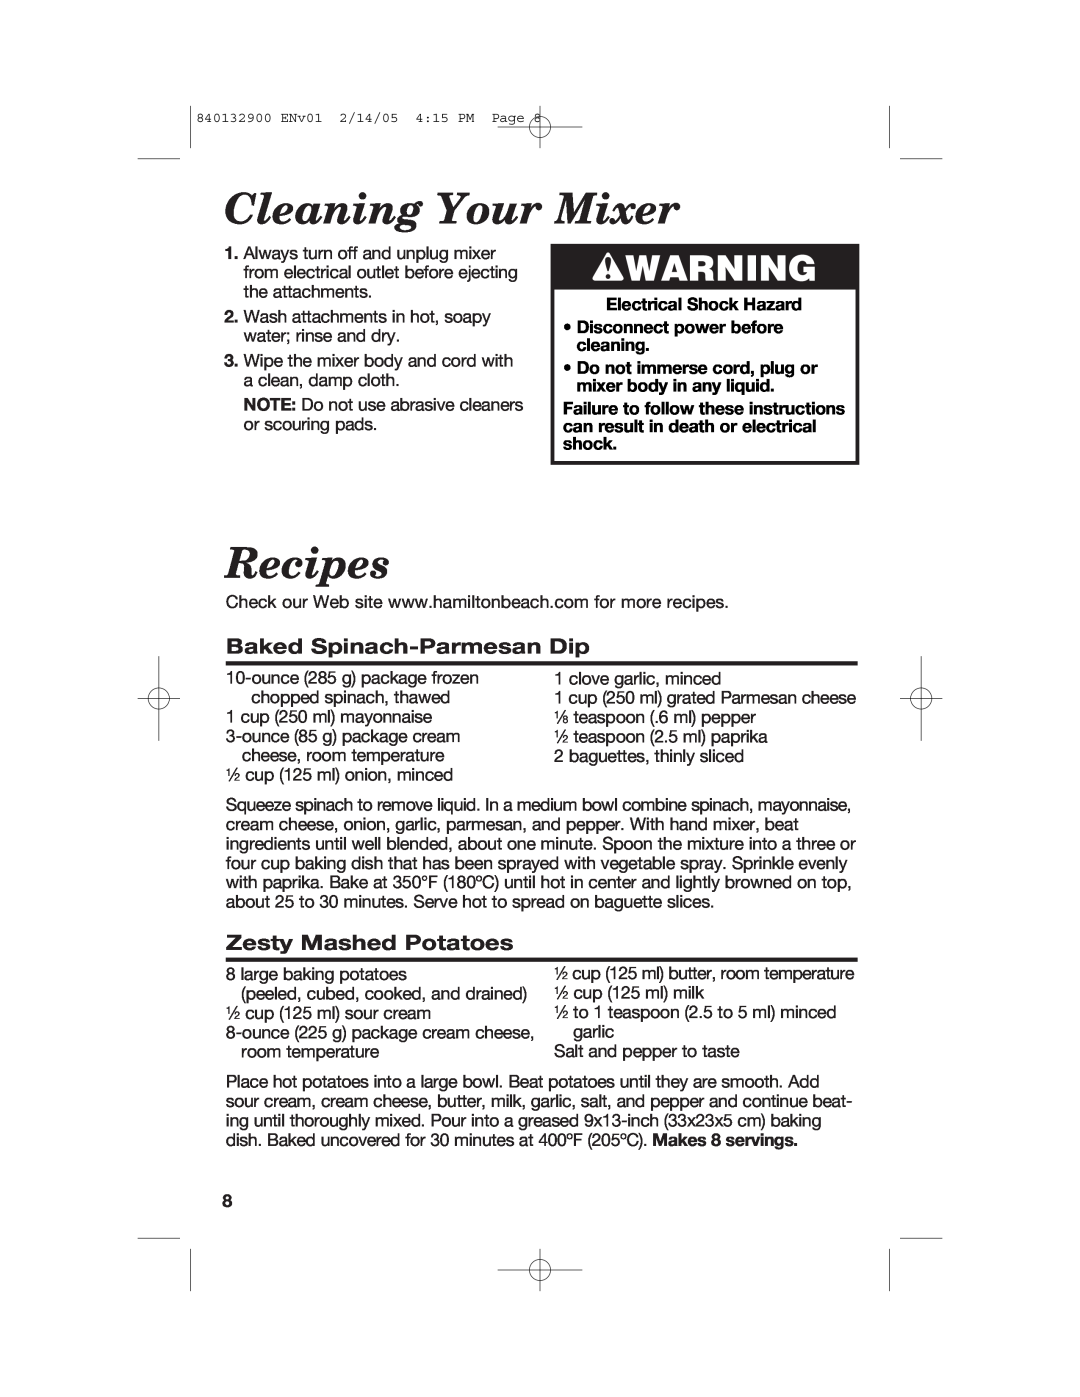 Hamilton Beach 840132900 manual Cleaning Your Mixer, Recipes, Baked Spinach-Parmesan Dip, Zesty Mashed Potatoes, wWARNING 